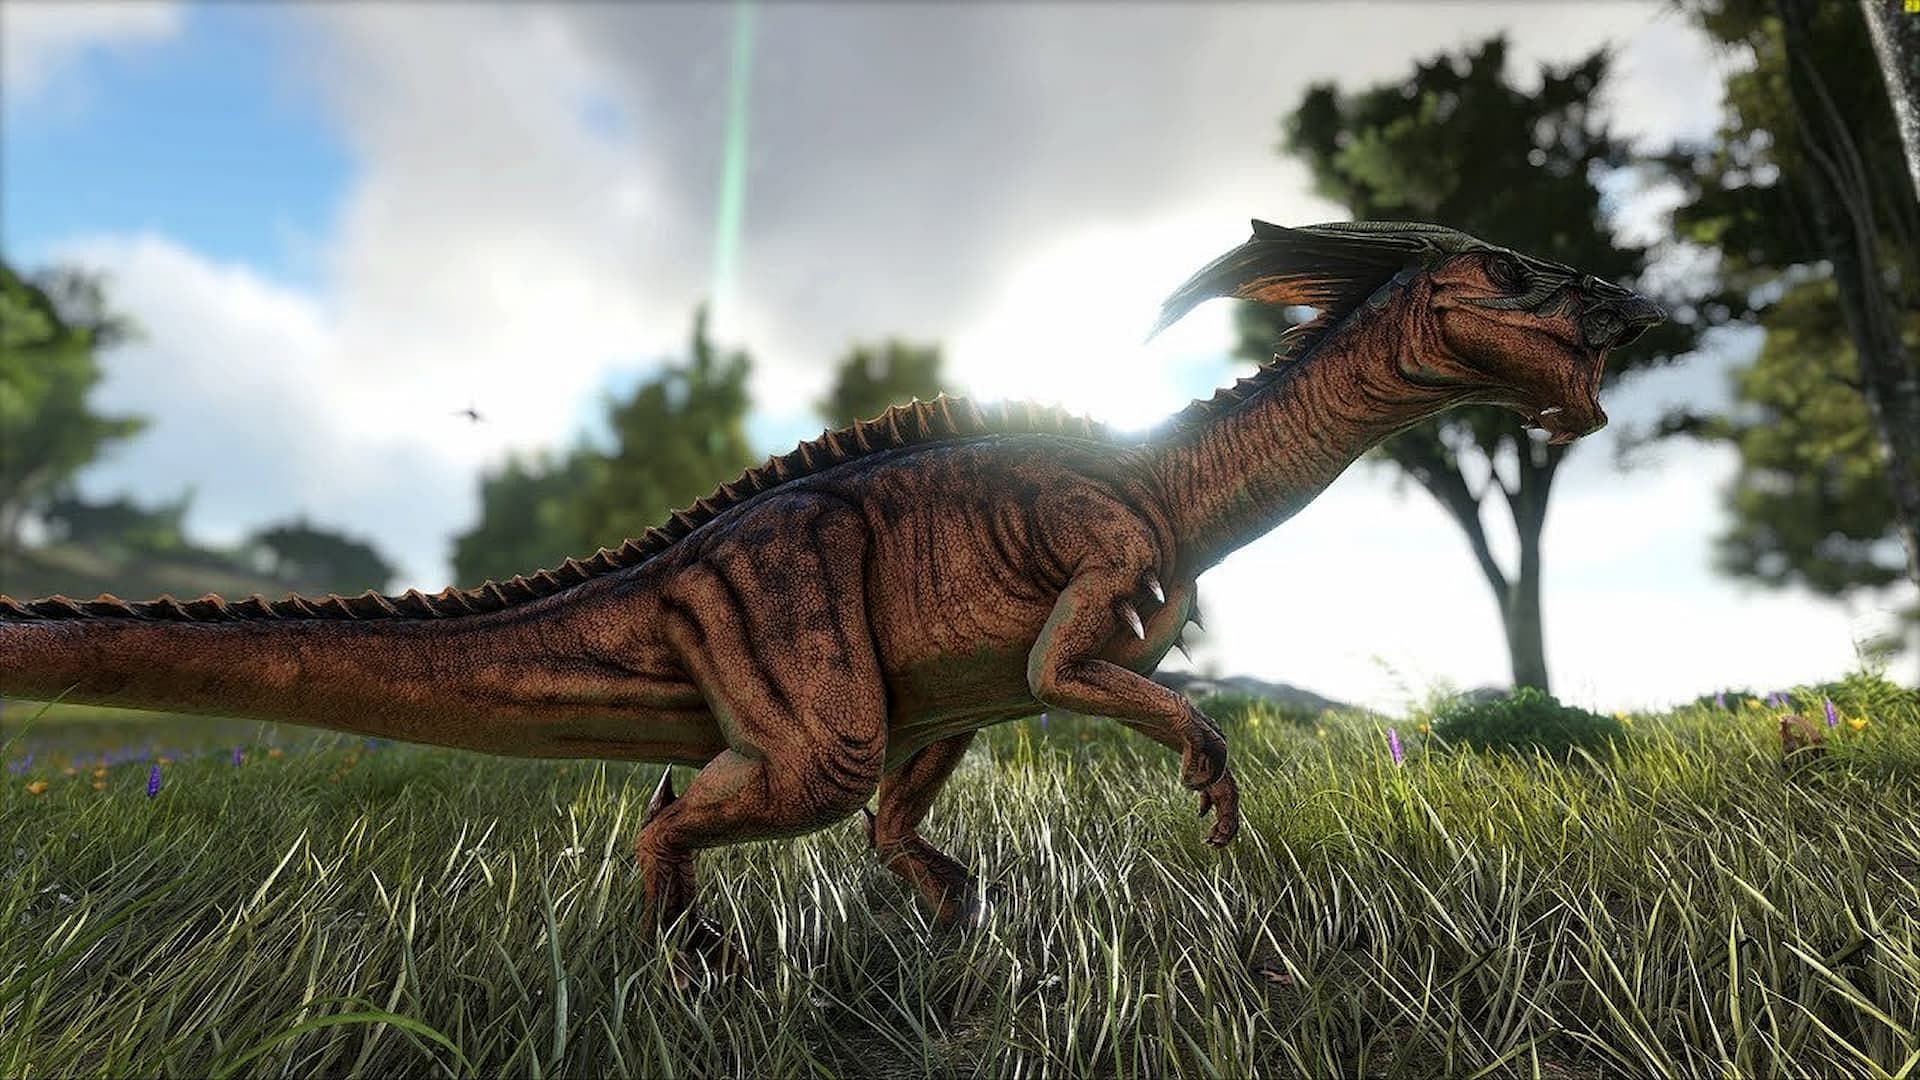 The Parasaur in the grasslandns in ARK Survival Ascened